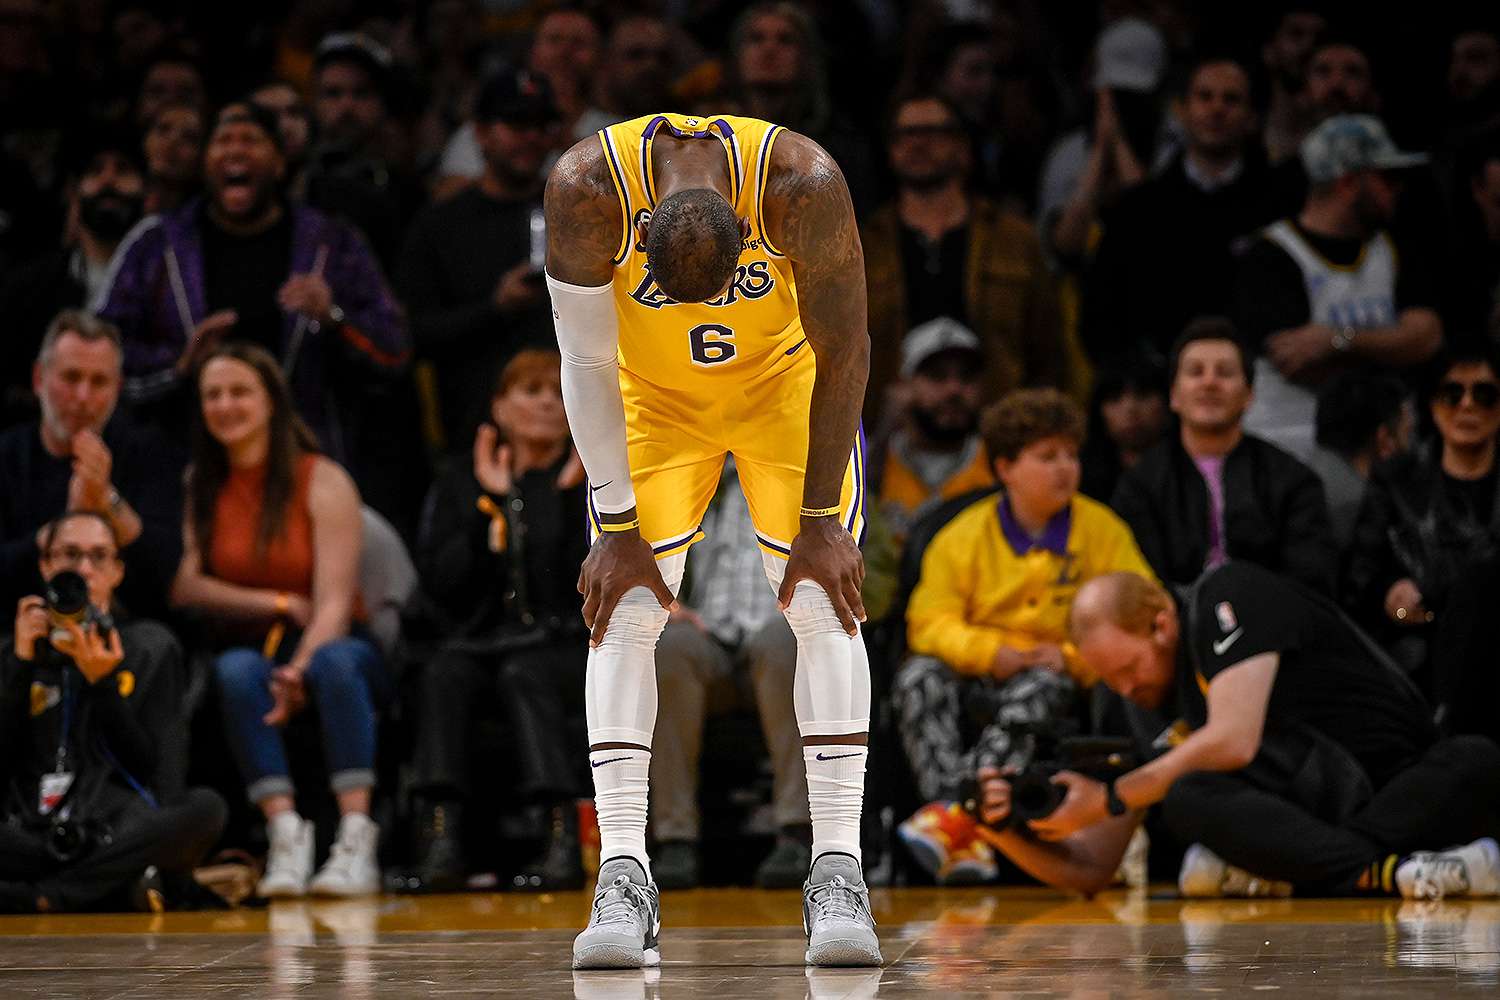 LeBron James (6) of the Los Angeles Lakers hangs his head during the fourth quarter of the Denver Nuggets' 113-111 Western Conference finals